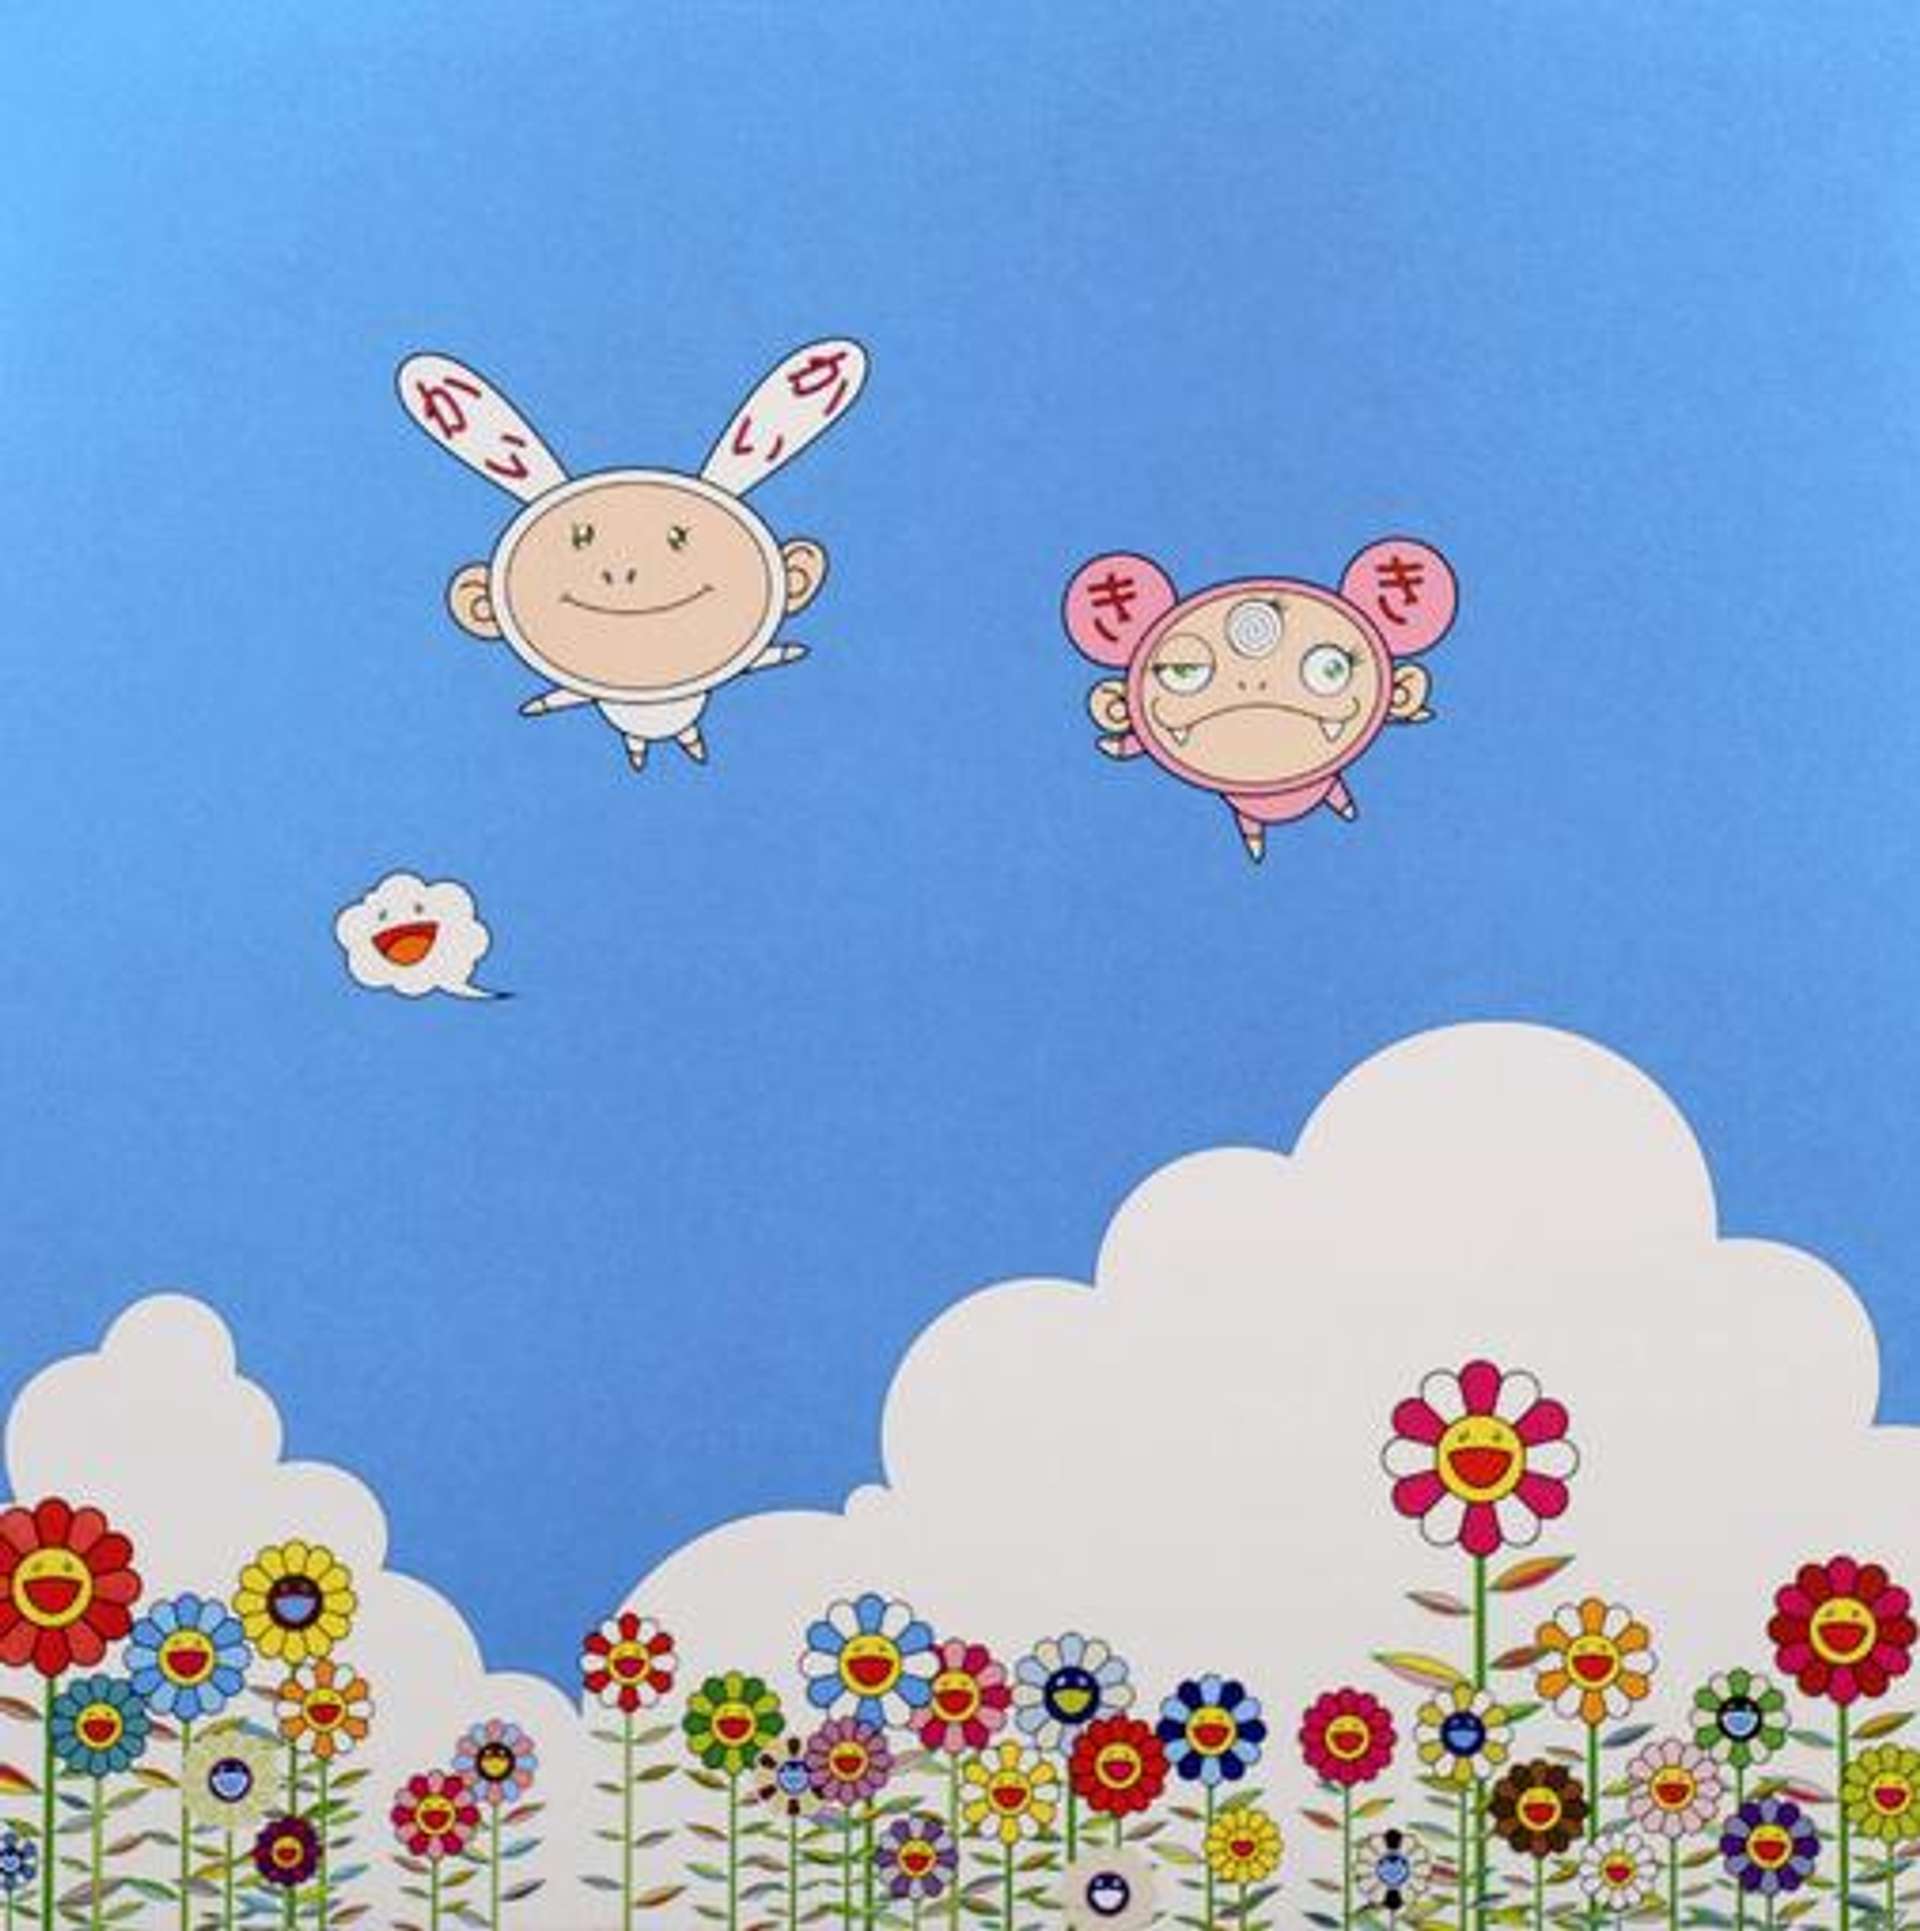 Takashi Murakami: If Only I Could Do This, If Only I Could Do That - Signed Print